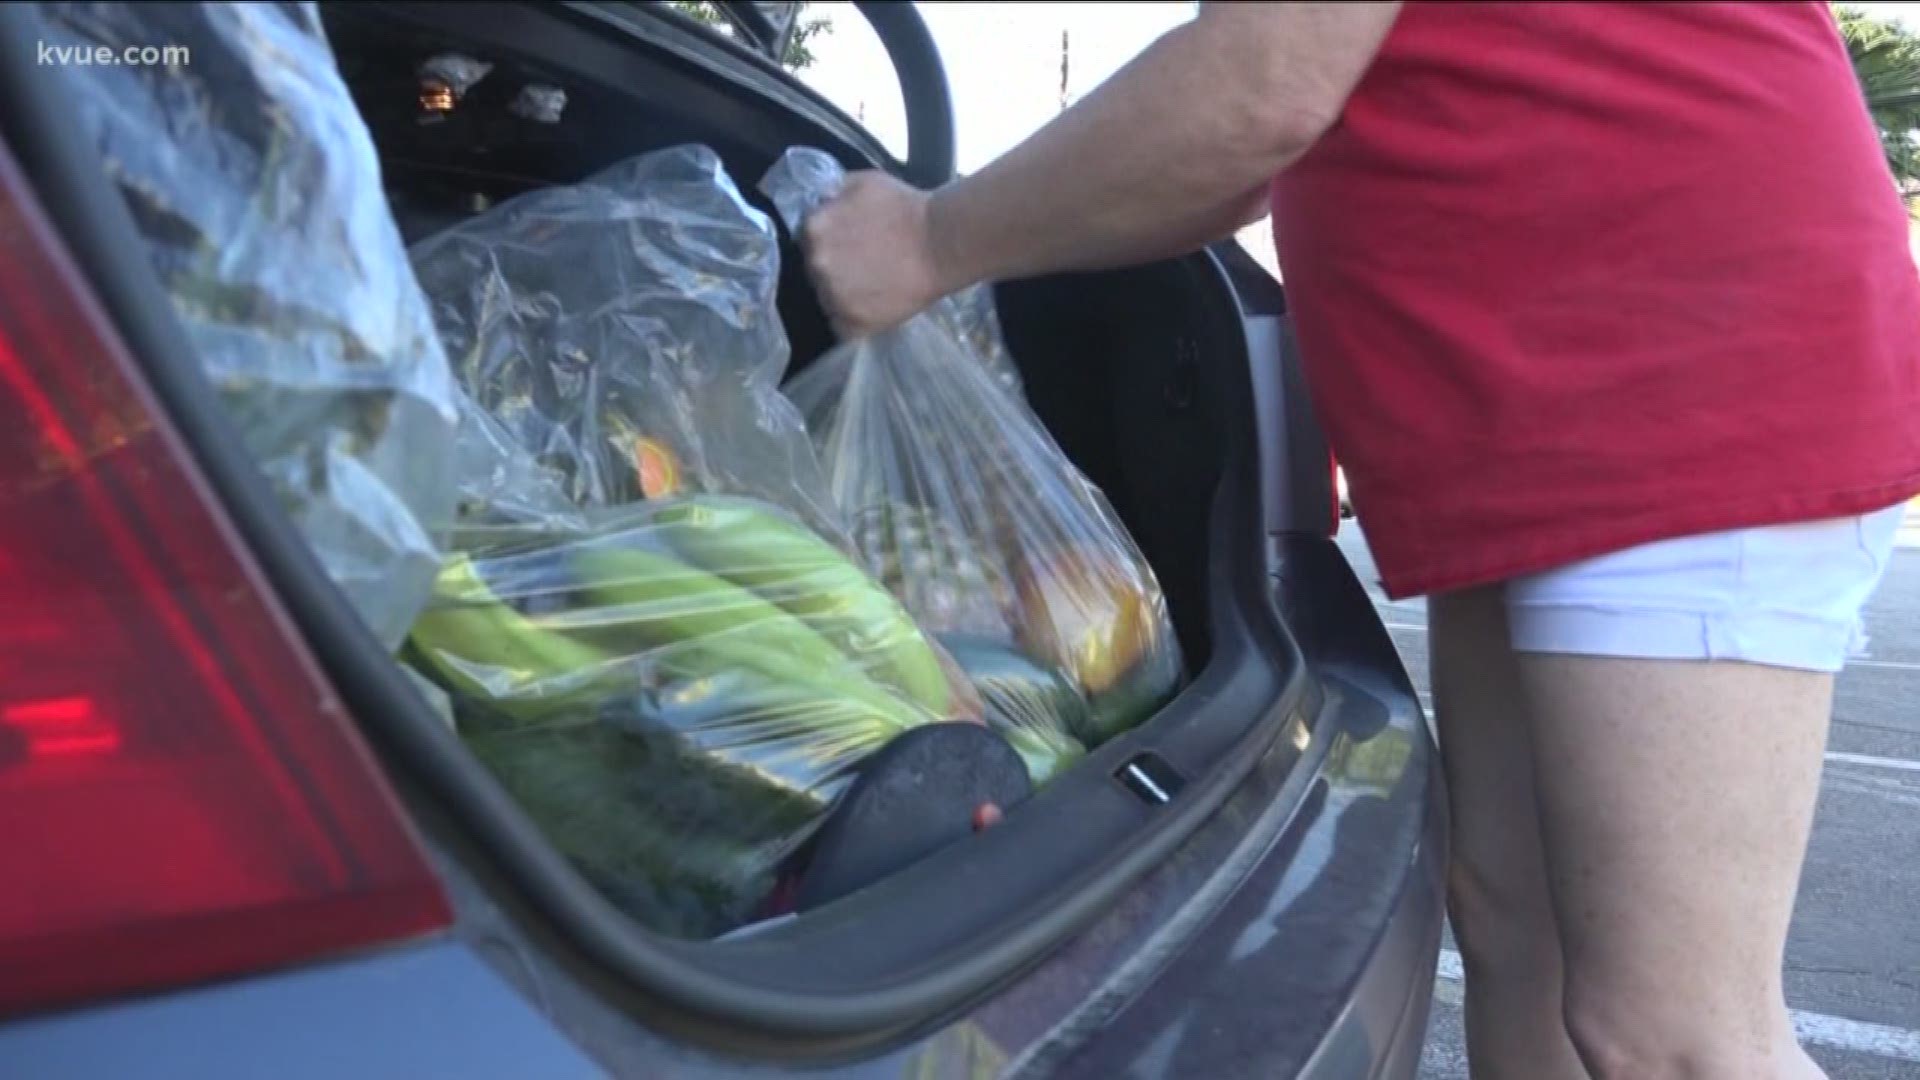 A few people spent their days delivering groceries around Travis and Williamson counties.